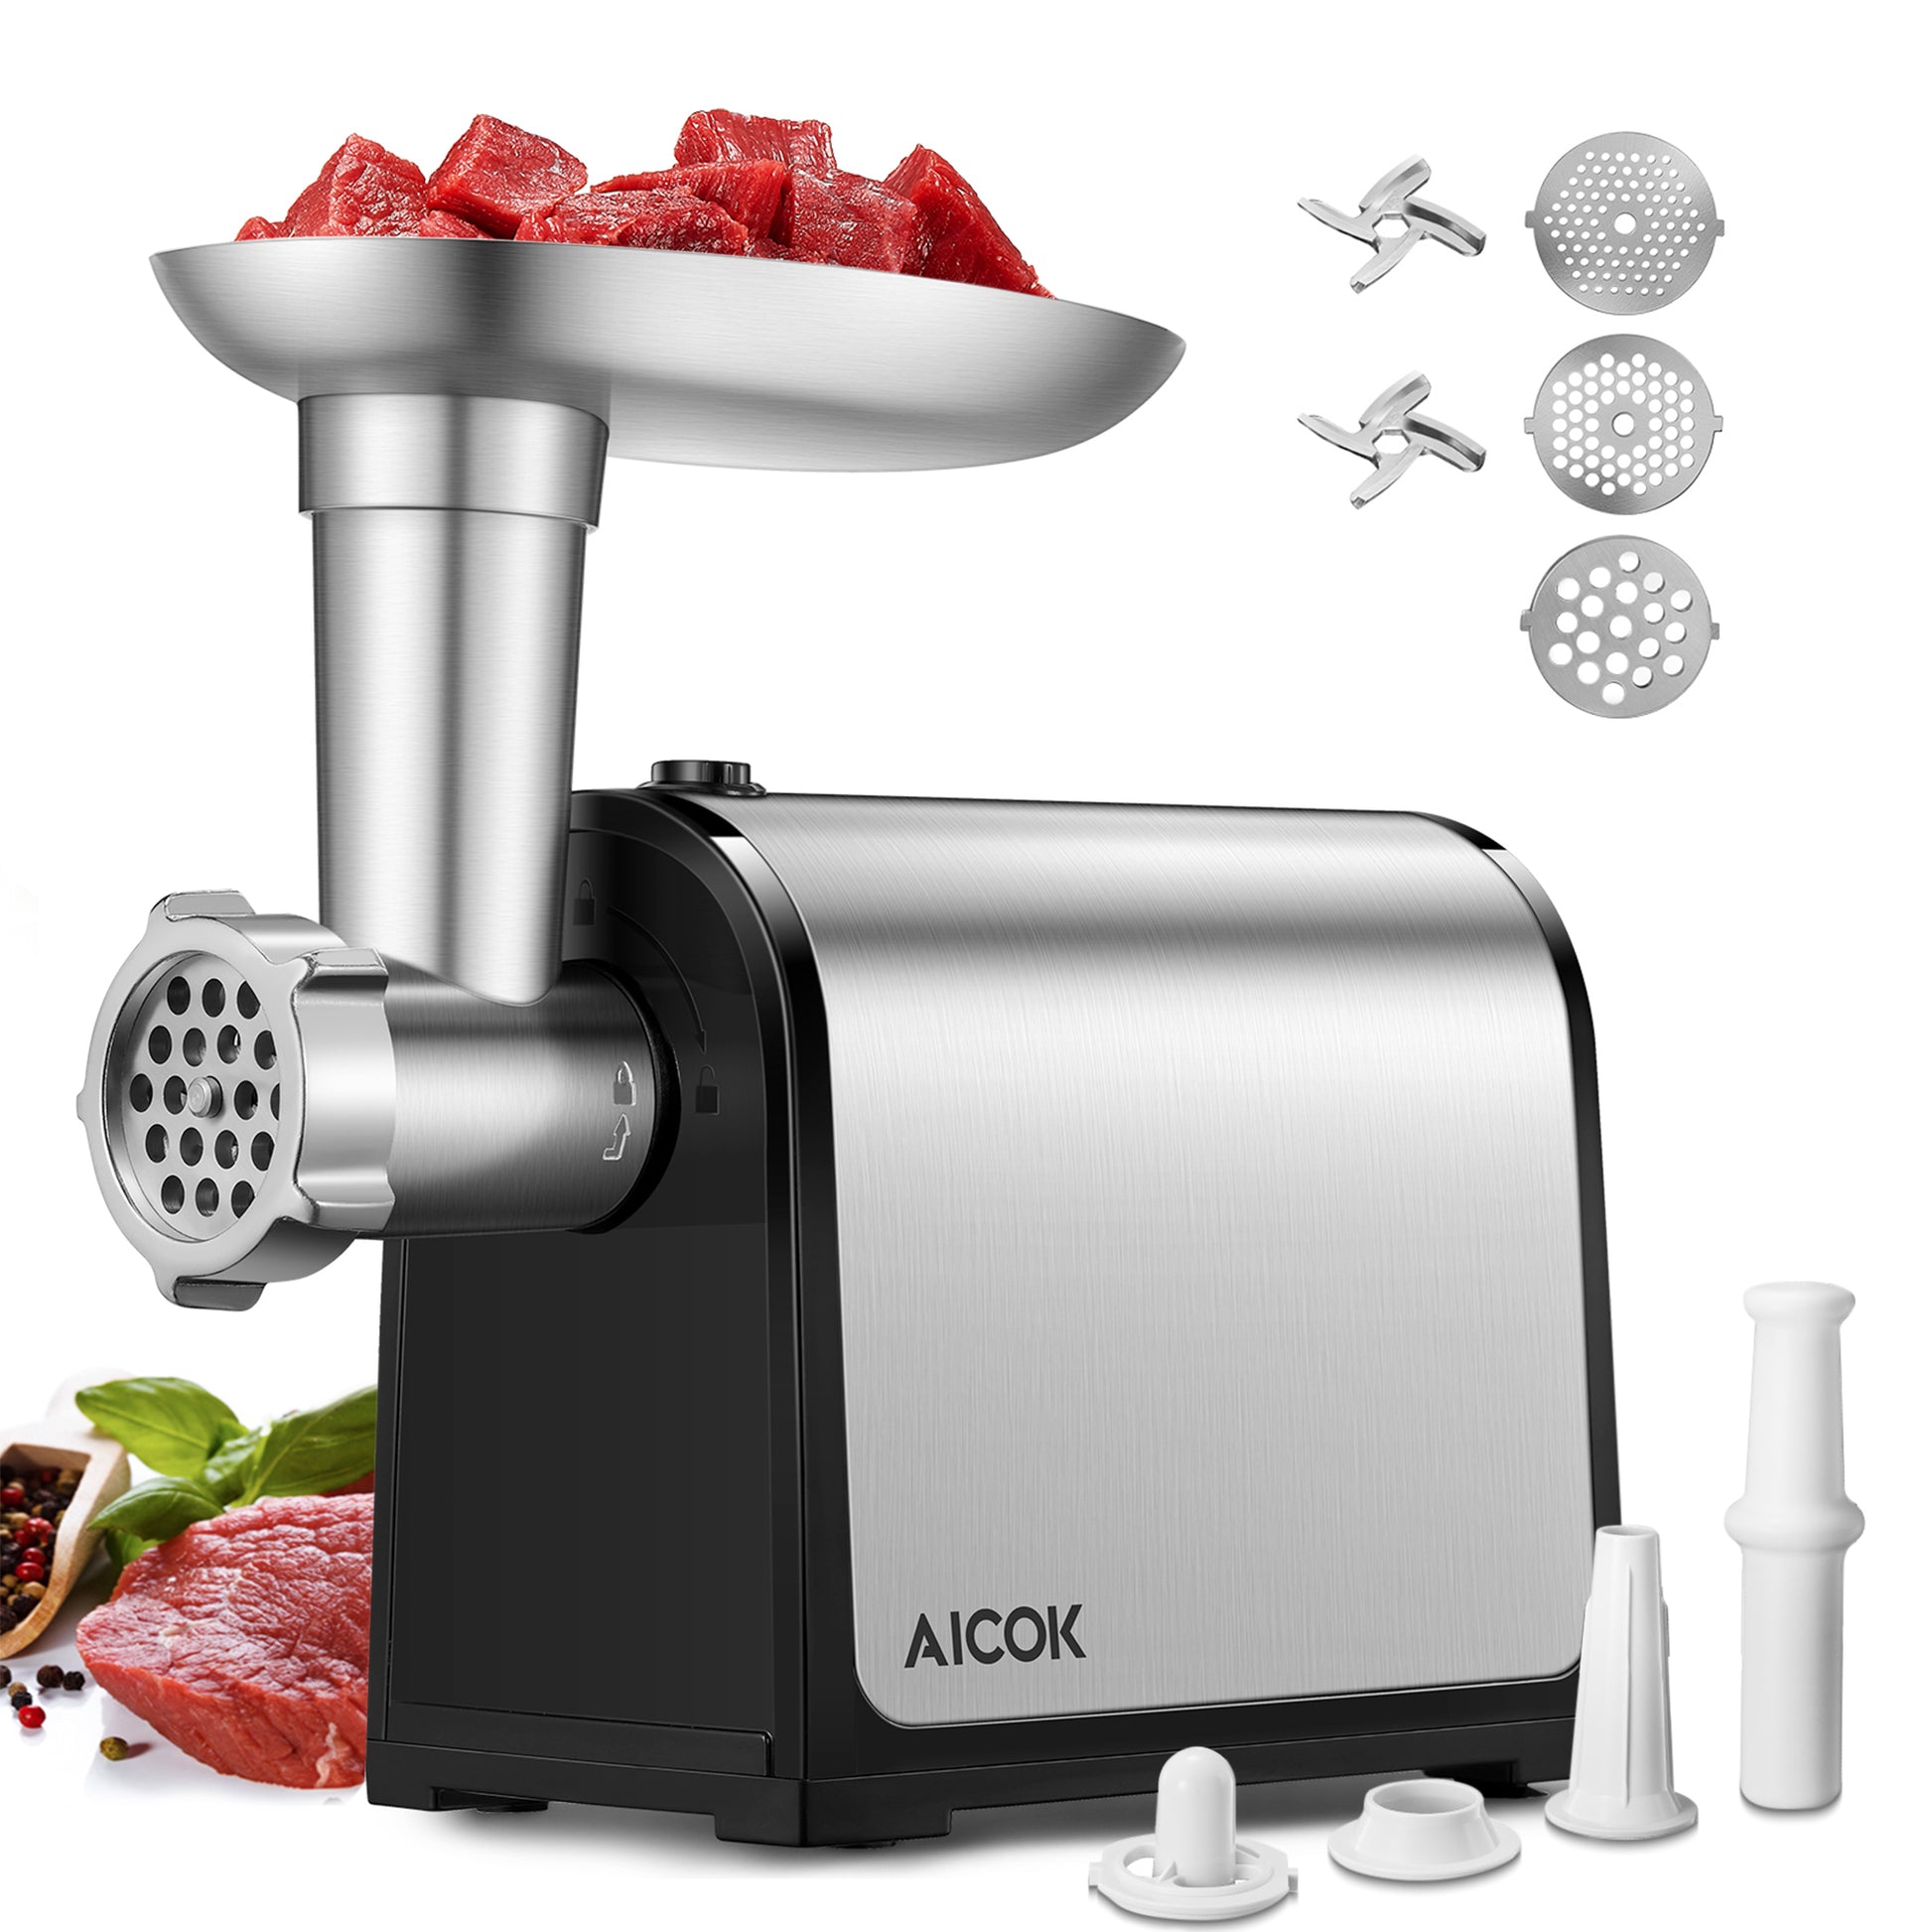 AICOK -Meat Grinder, 3-IN-1 Stainless Steel Meat Mincer, Sausage Stuffer, [2000W Max] Food Grinder MG-2430RB, recommended meat grinder, home kitchen & commercial use